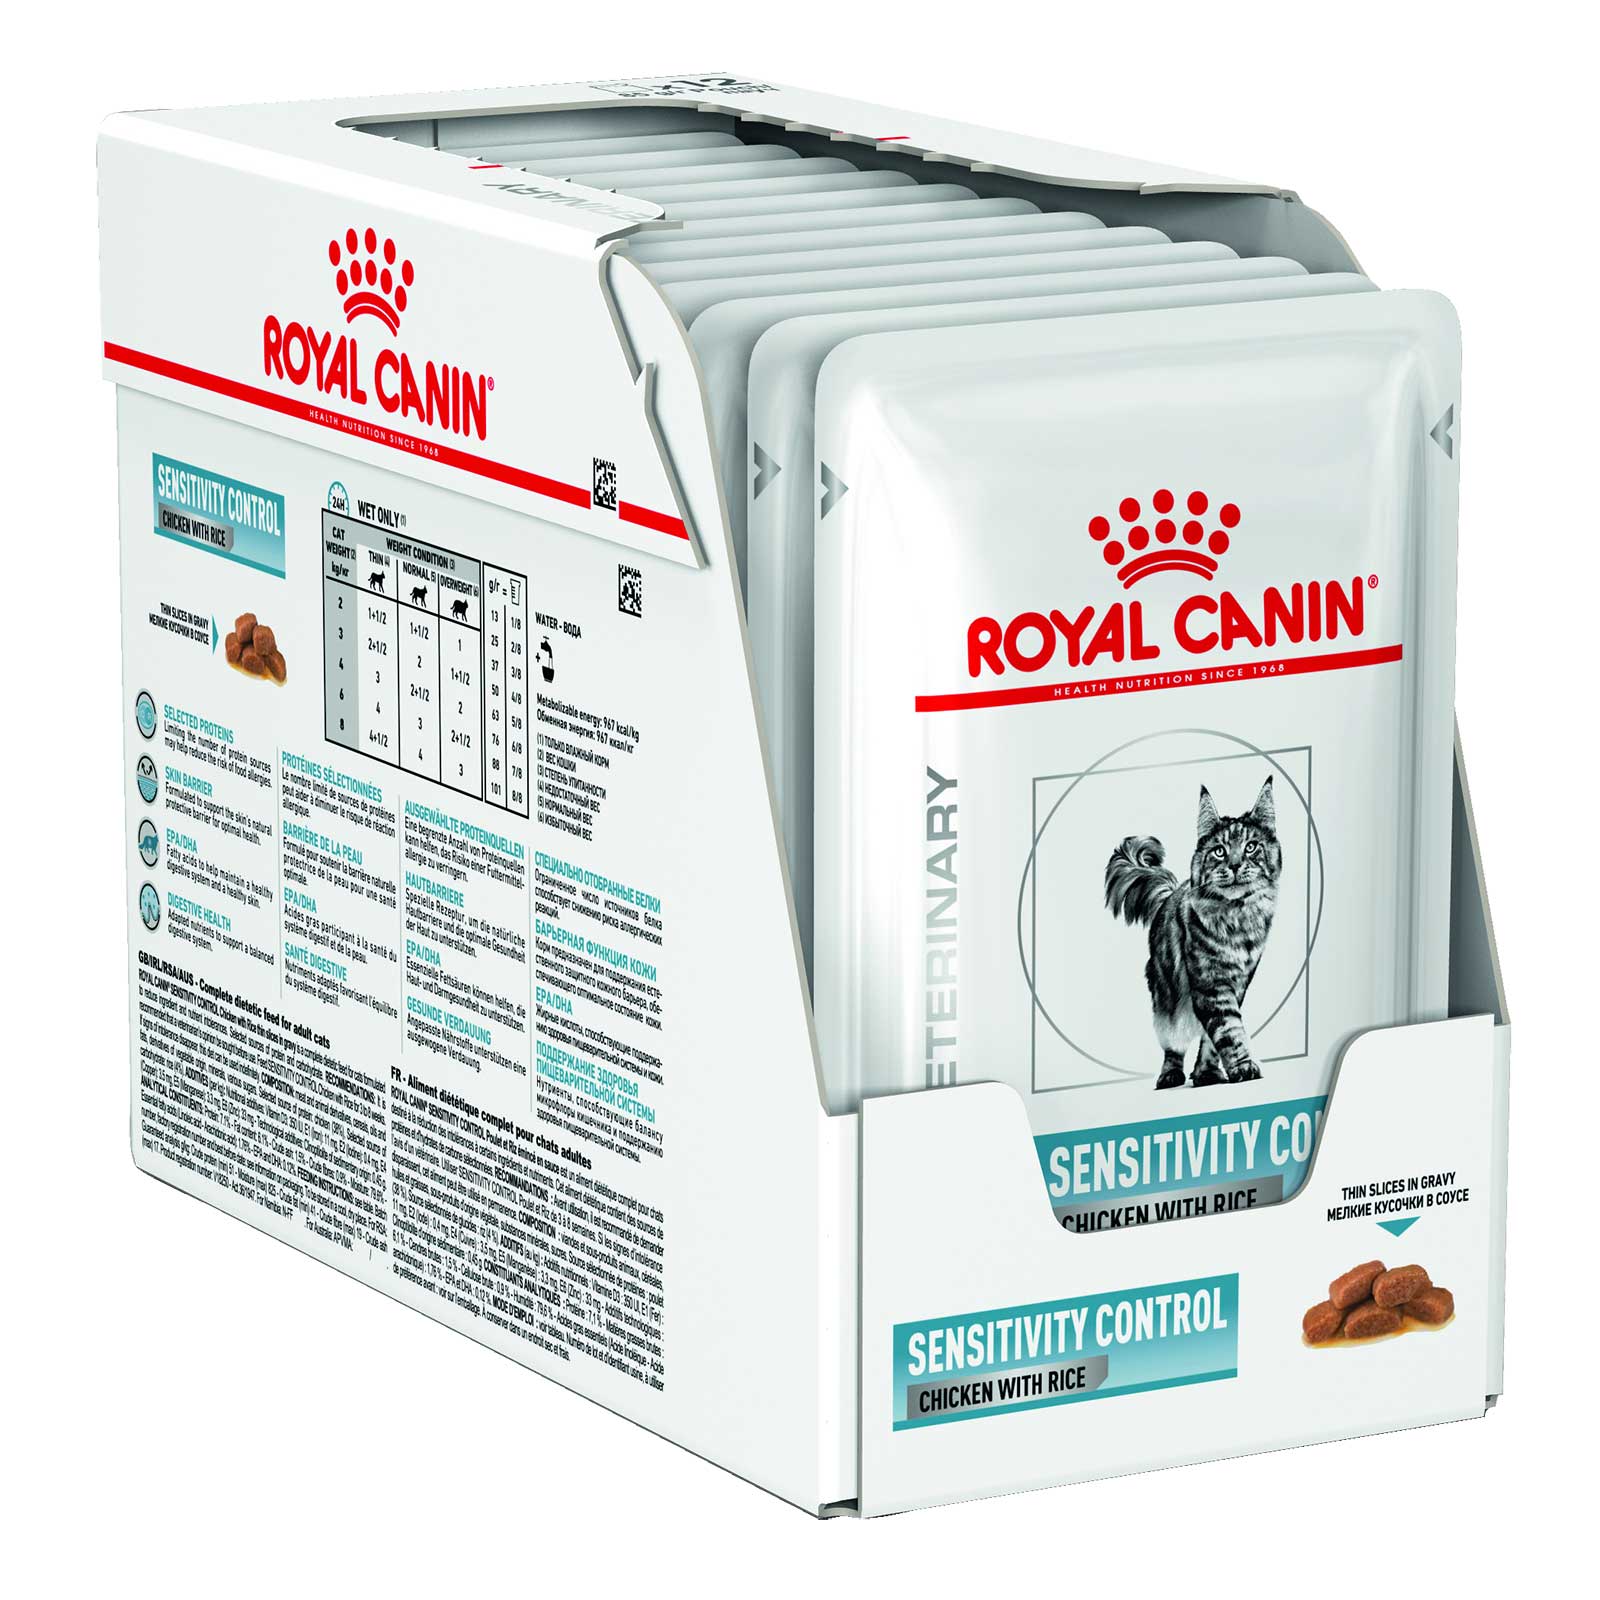 Royal Canin Veterinary Cat Food Pouch Sensitivity Control Chicken & Rice